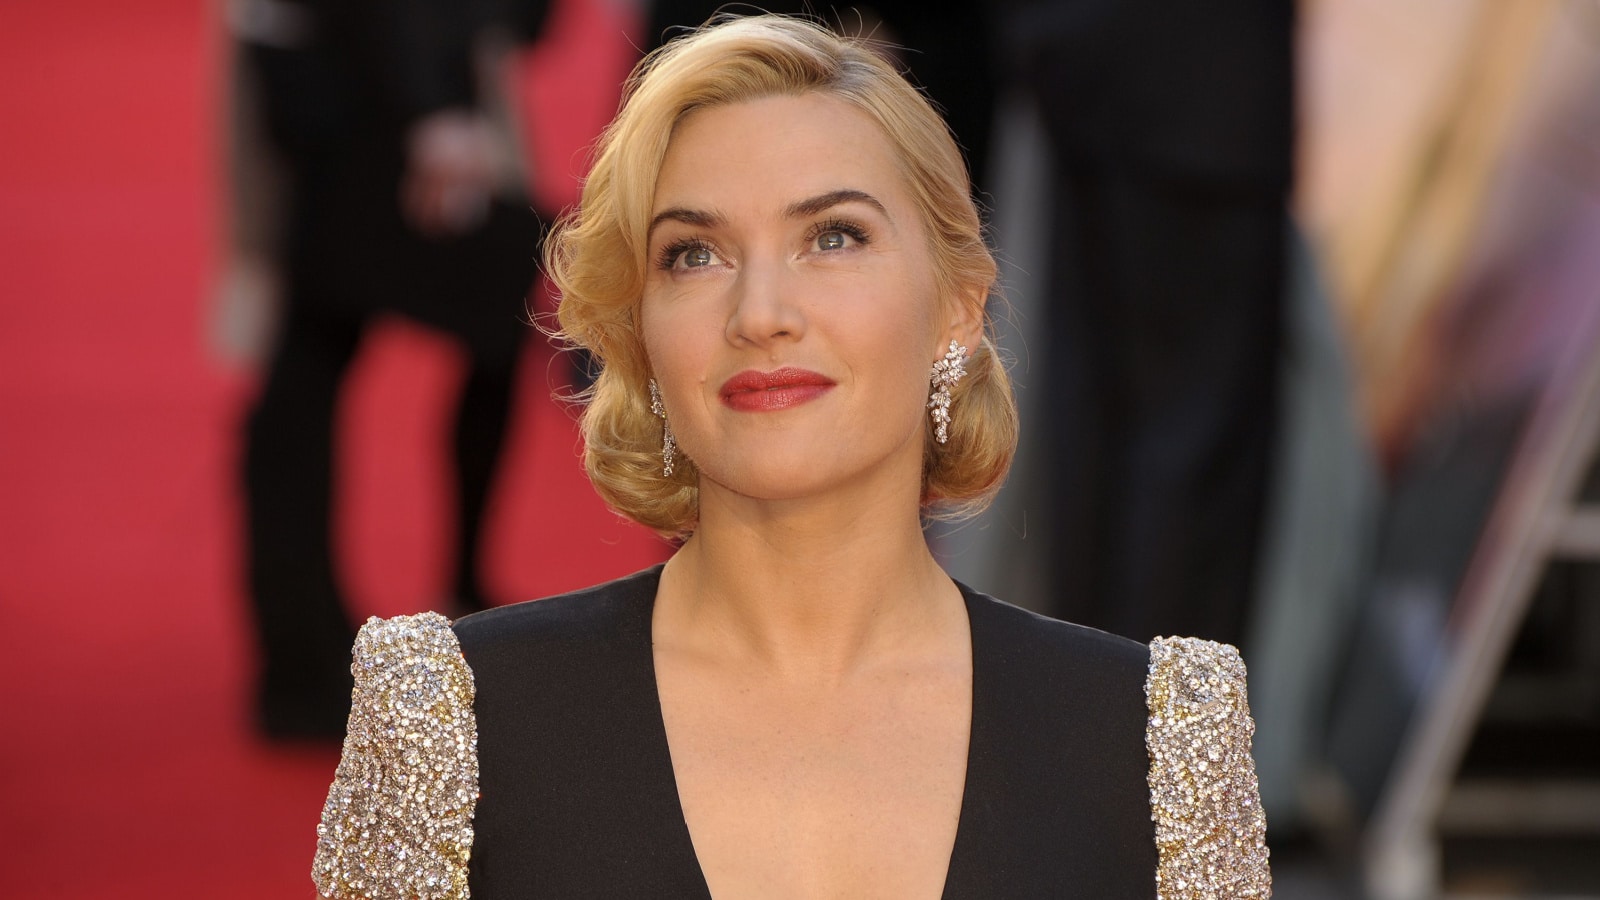 LONDON -MARCH 27: Kate Winslet attends the world premiere of 'Titanic 3D' at the Royal Albert Hall on March 27, 2012 in London.